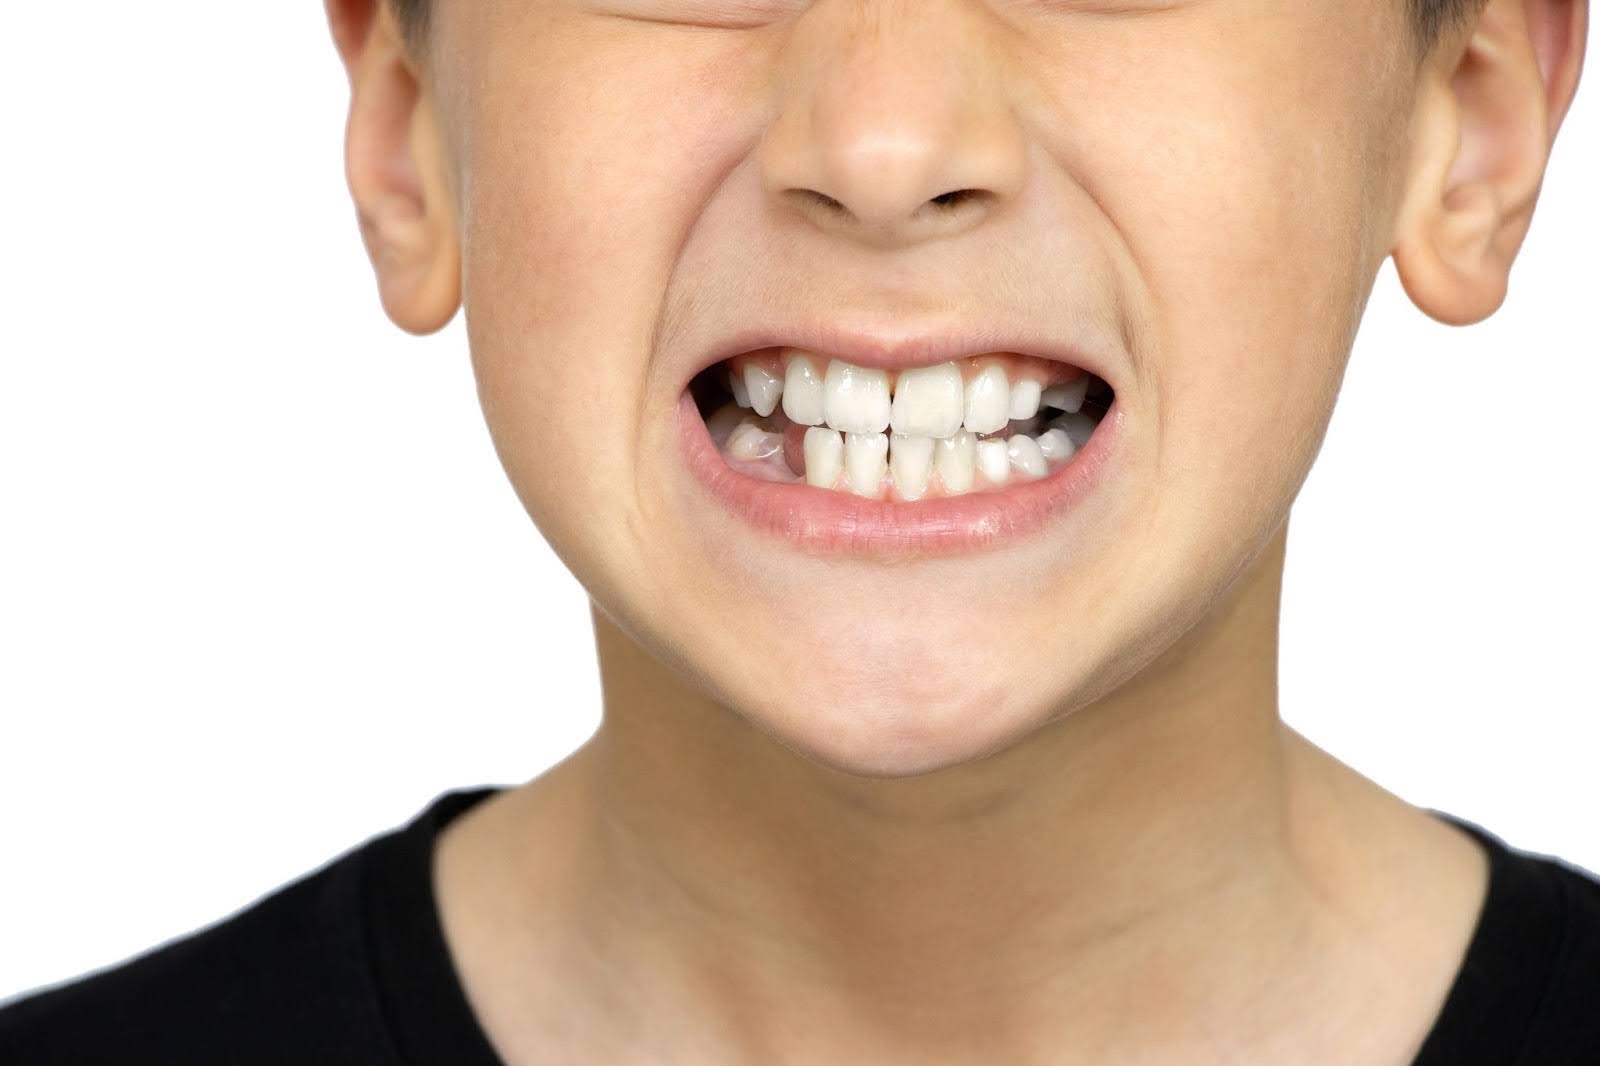 What to do for TMJ and teeth grinding in kids